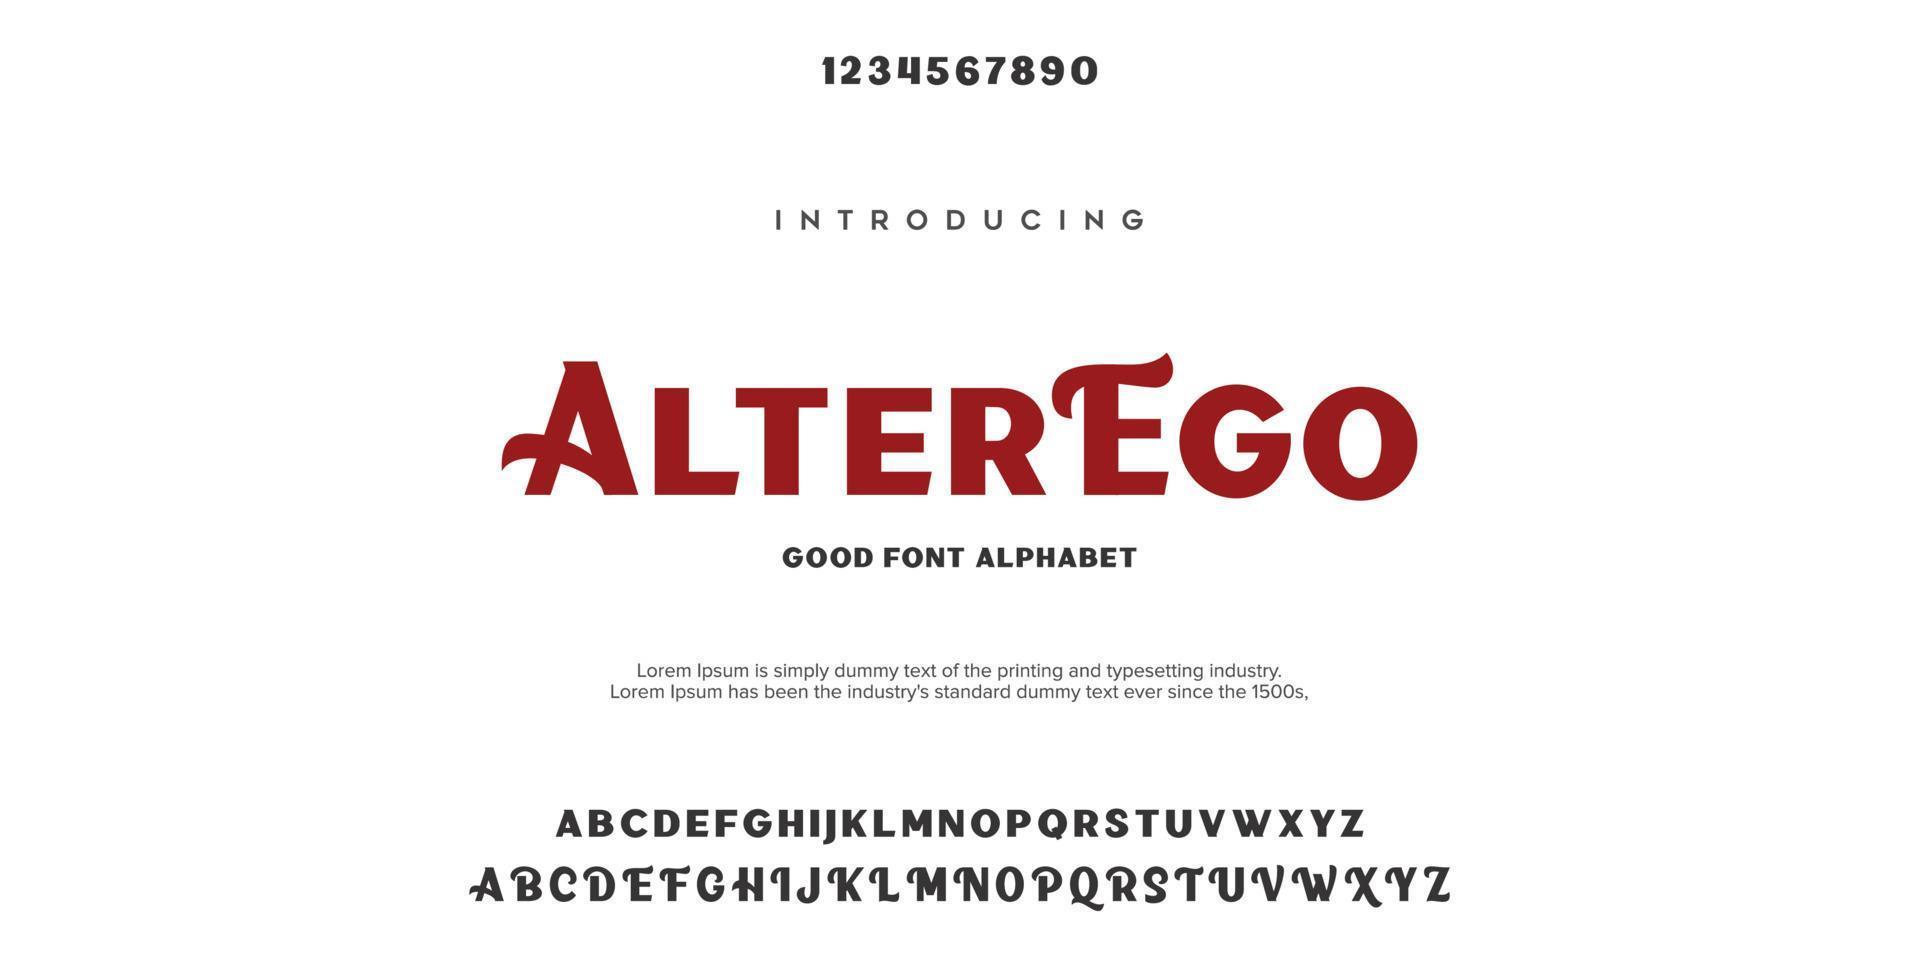 Alter Ego Abstract Fashion font alphabet. Minimal modern urban fonts for logo, brand etc. Typography typeface uppercase lowercase and number. vector illustration